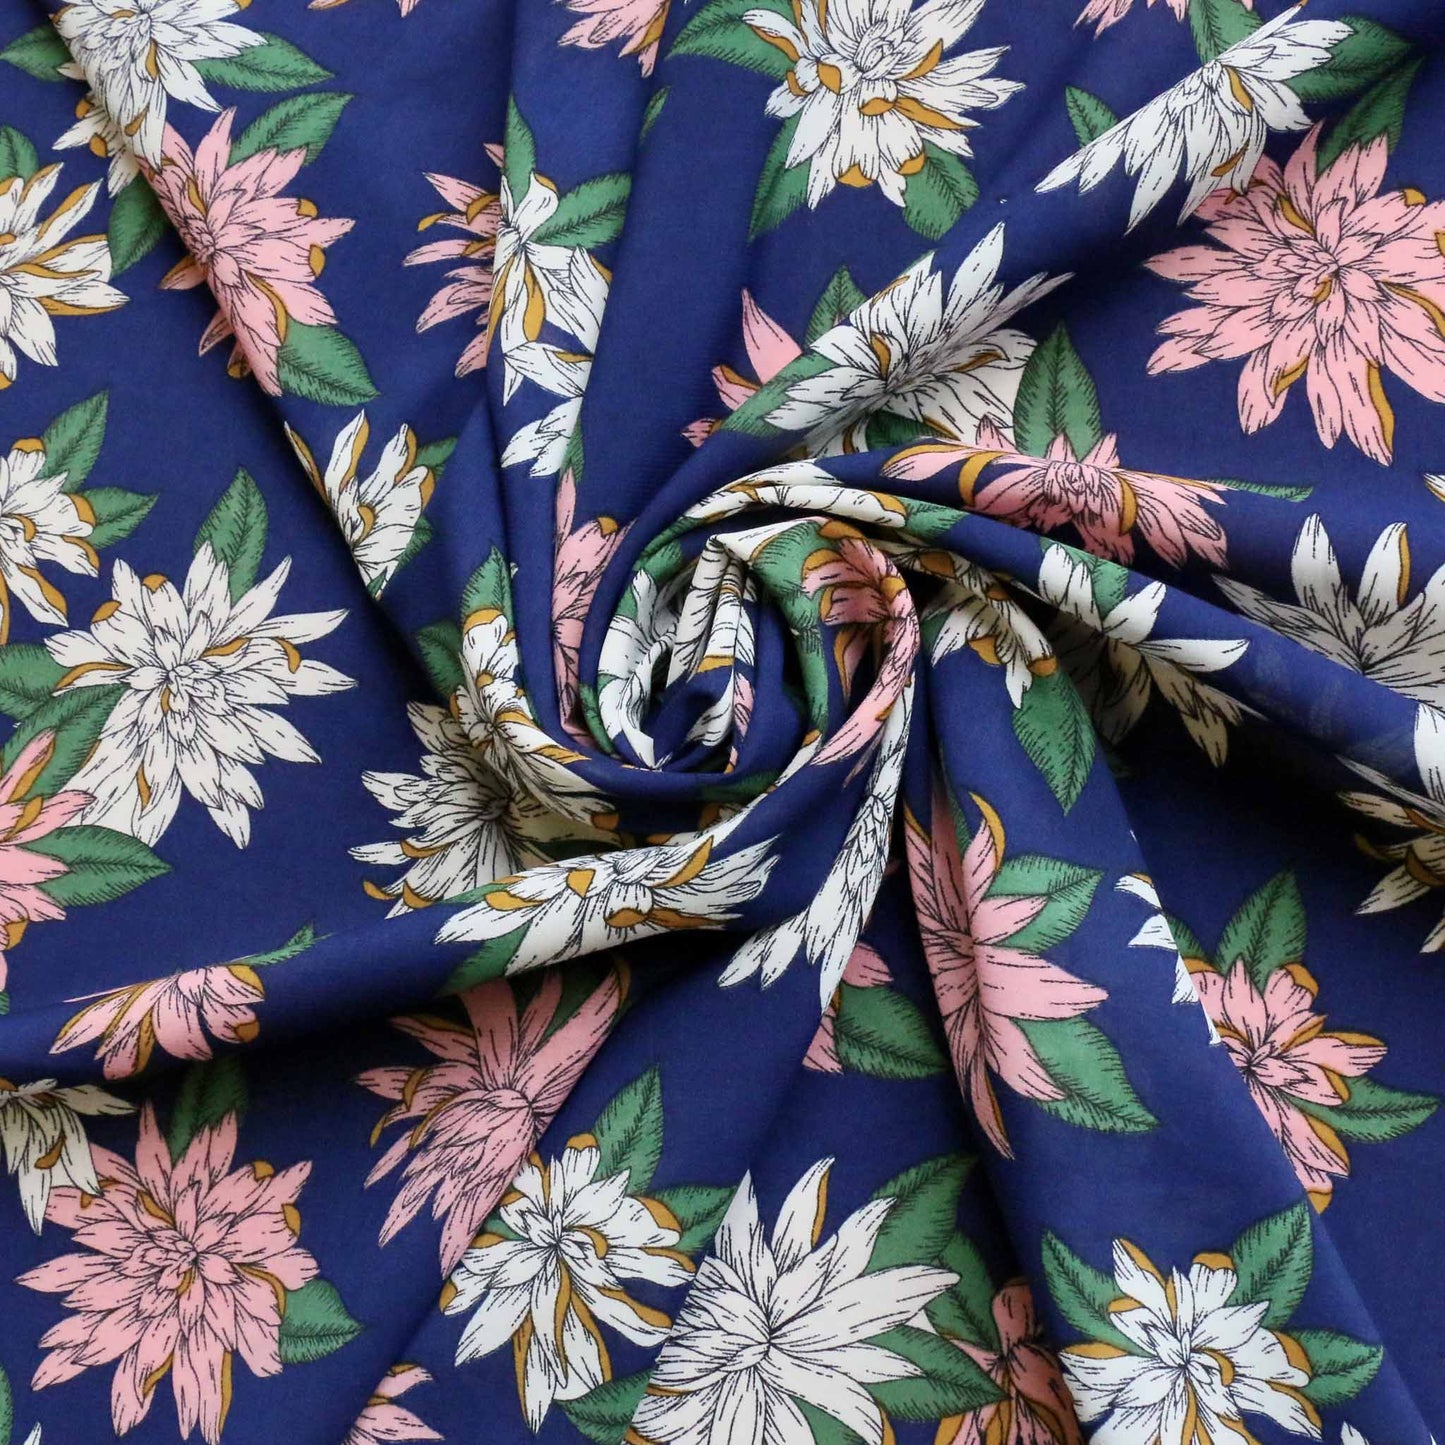 pink white and blue polyester chiffon stretchy dressmaking fabric with large floral print